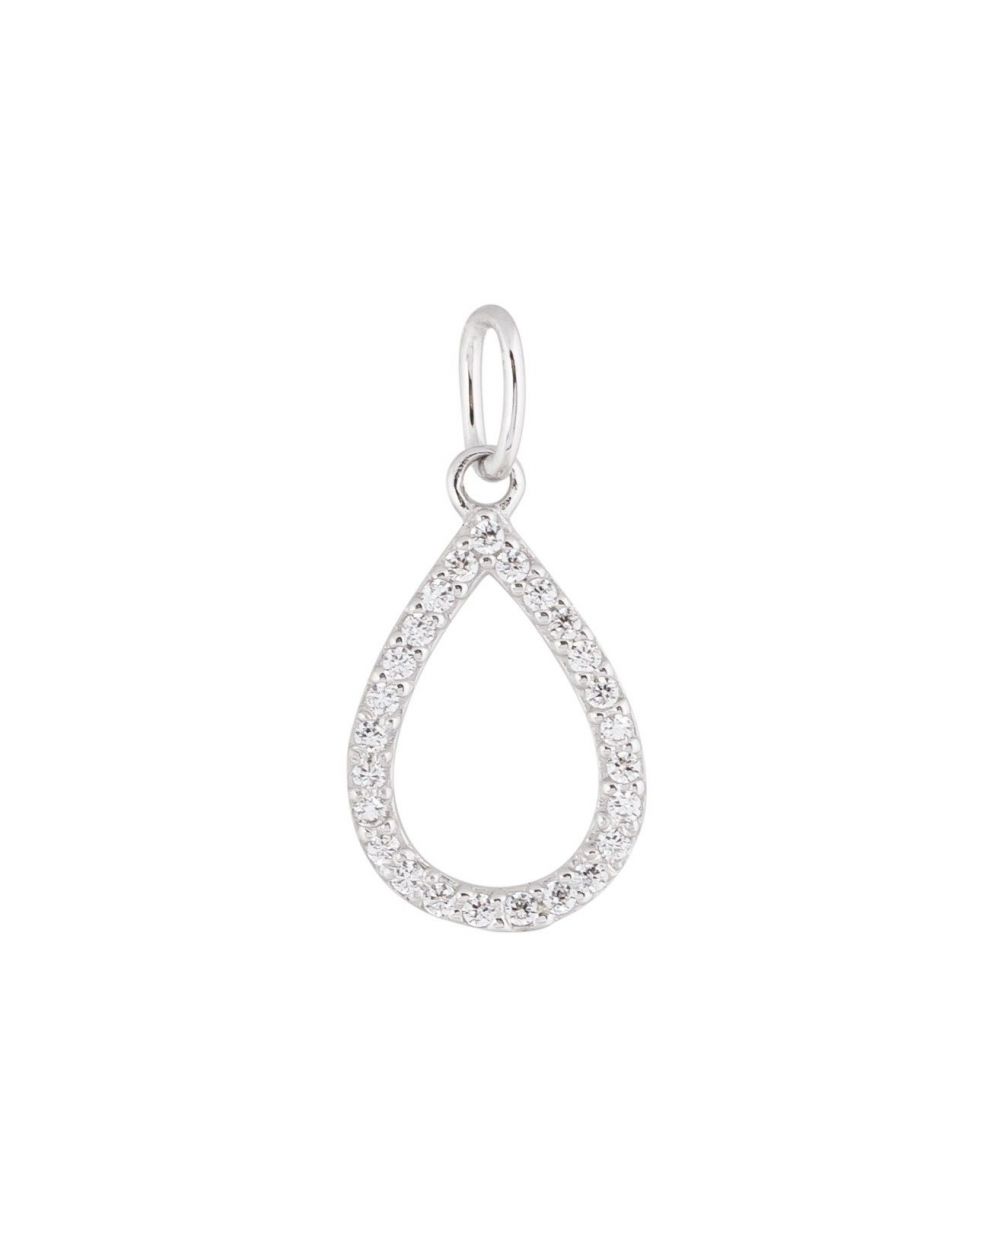 Solitaire or blanc 18 carats